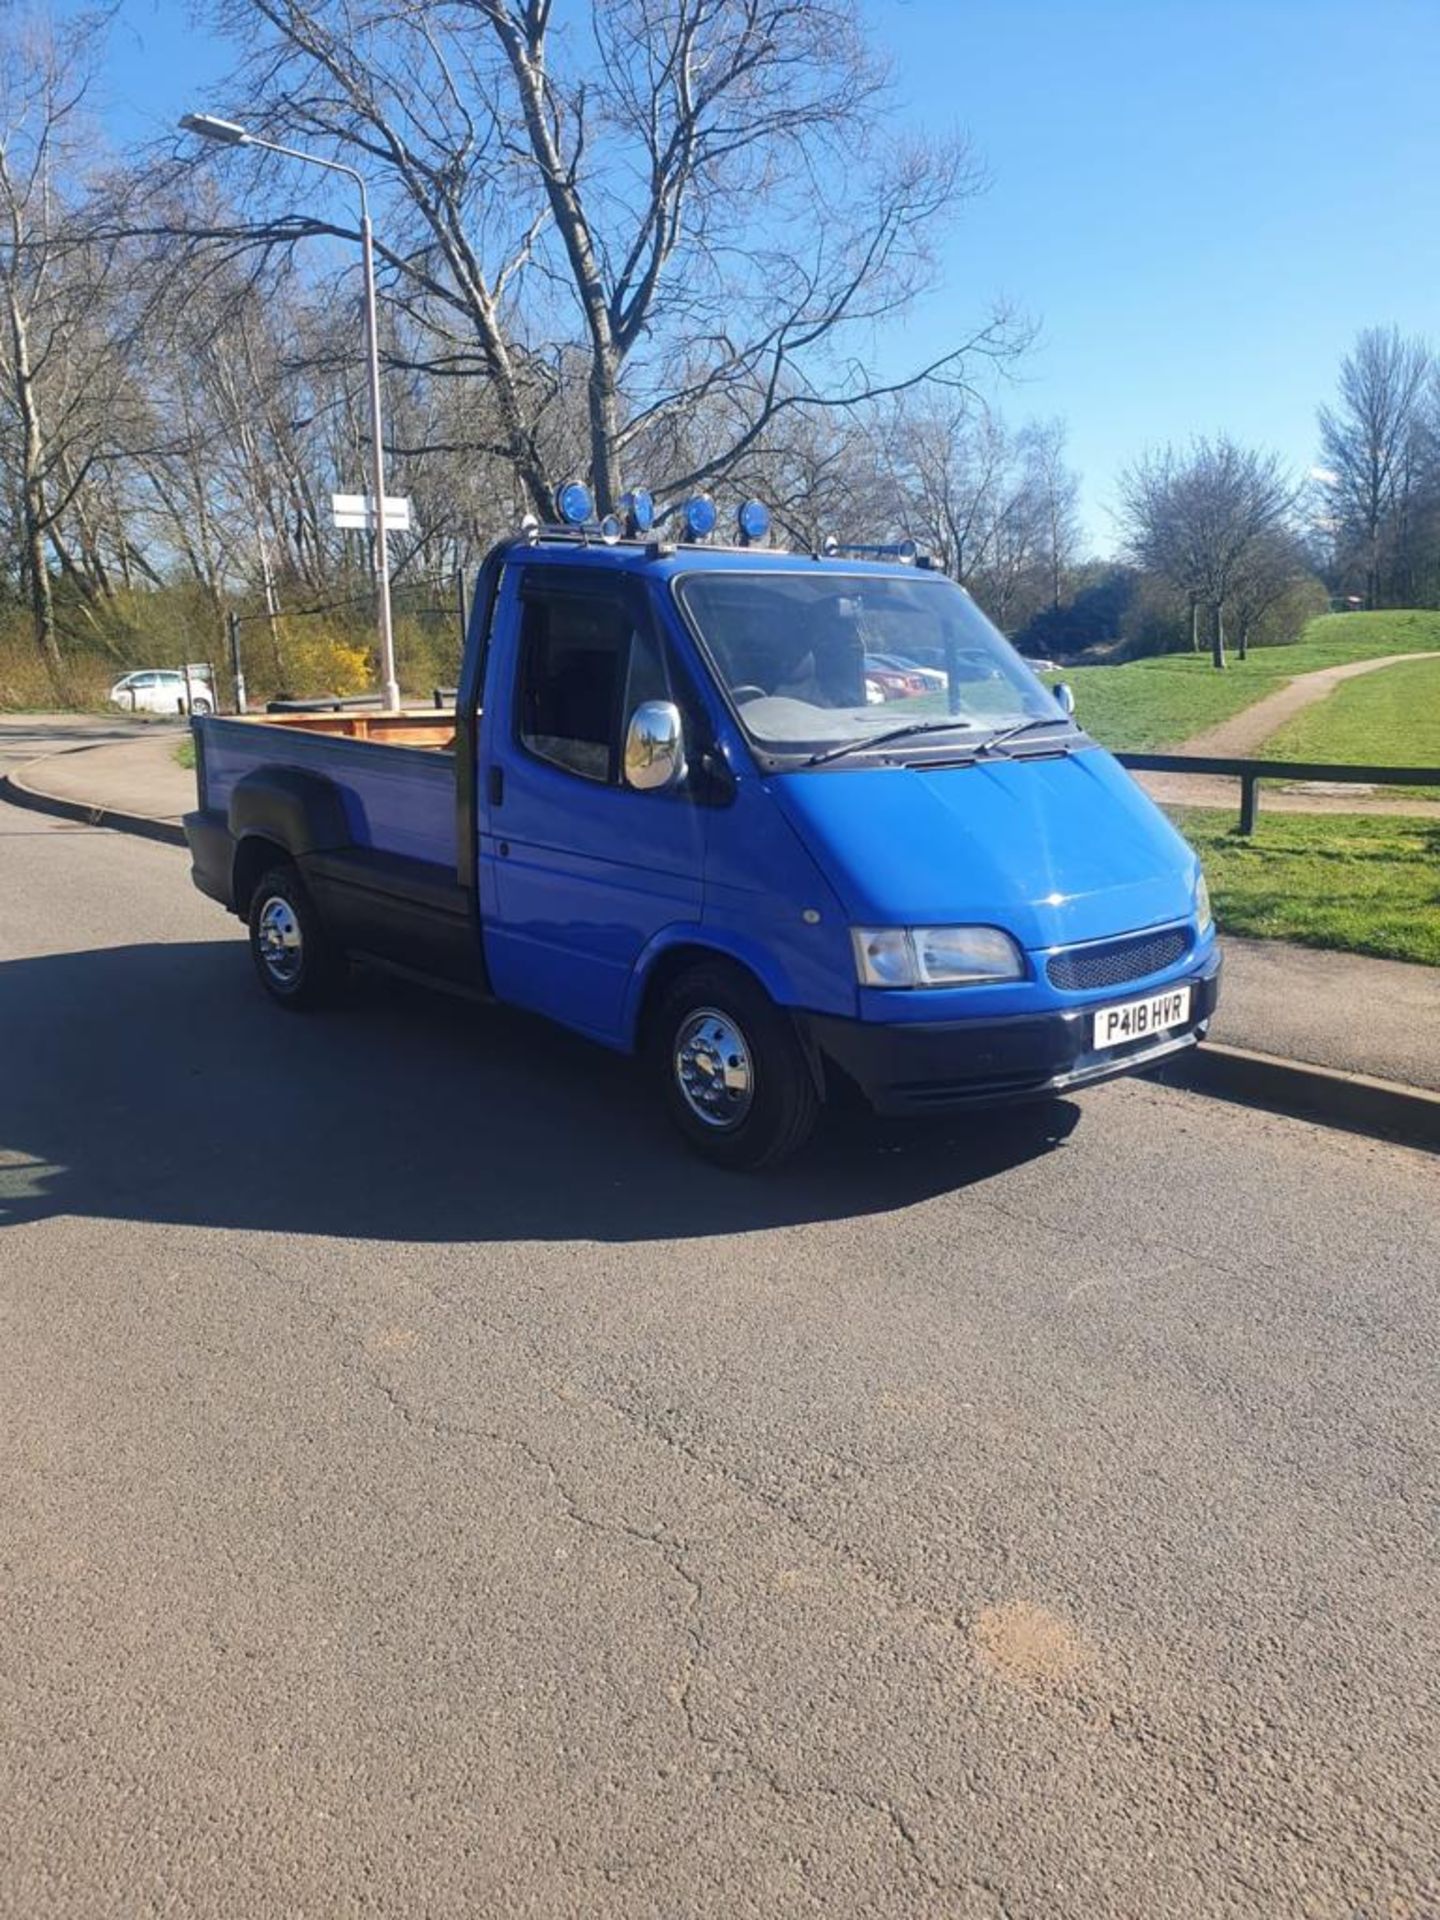 1997 FORD TRANSIT FLARESIDE, BLUE PICK-UP, DIESEL, SHOWING 10 PREVIOUS KEEPERS *NO VAT* - Image 3 of 6